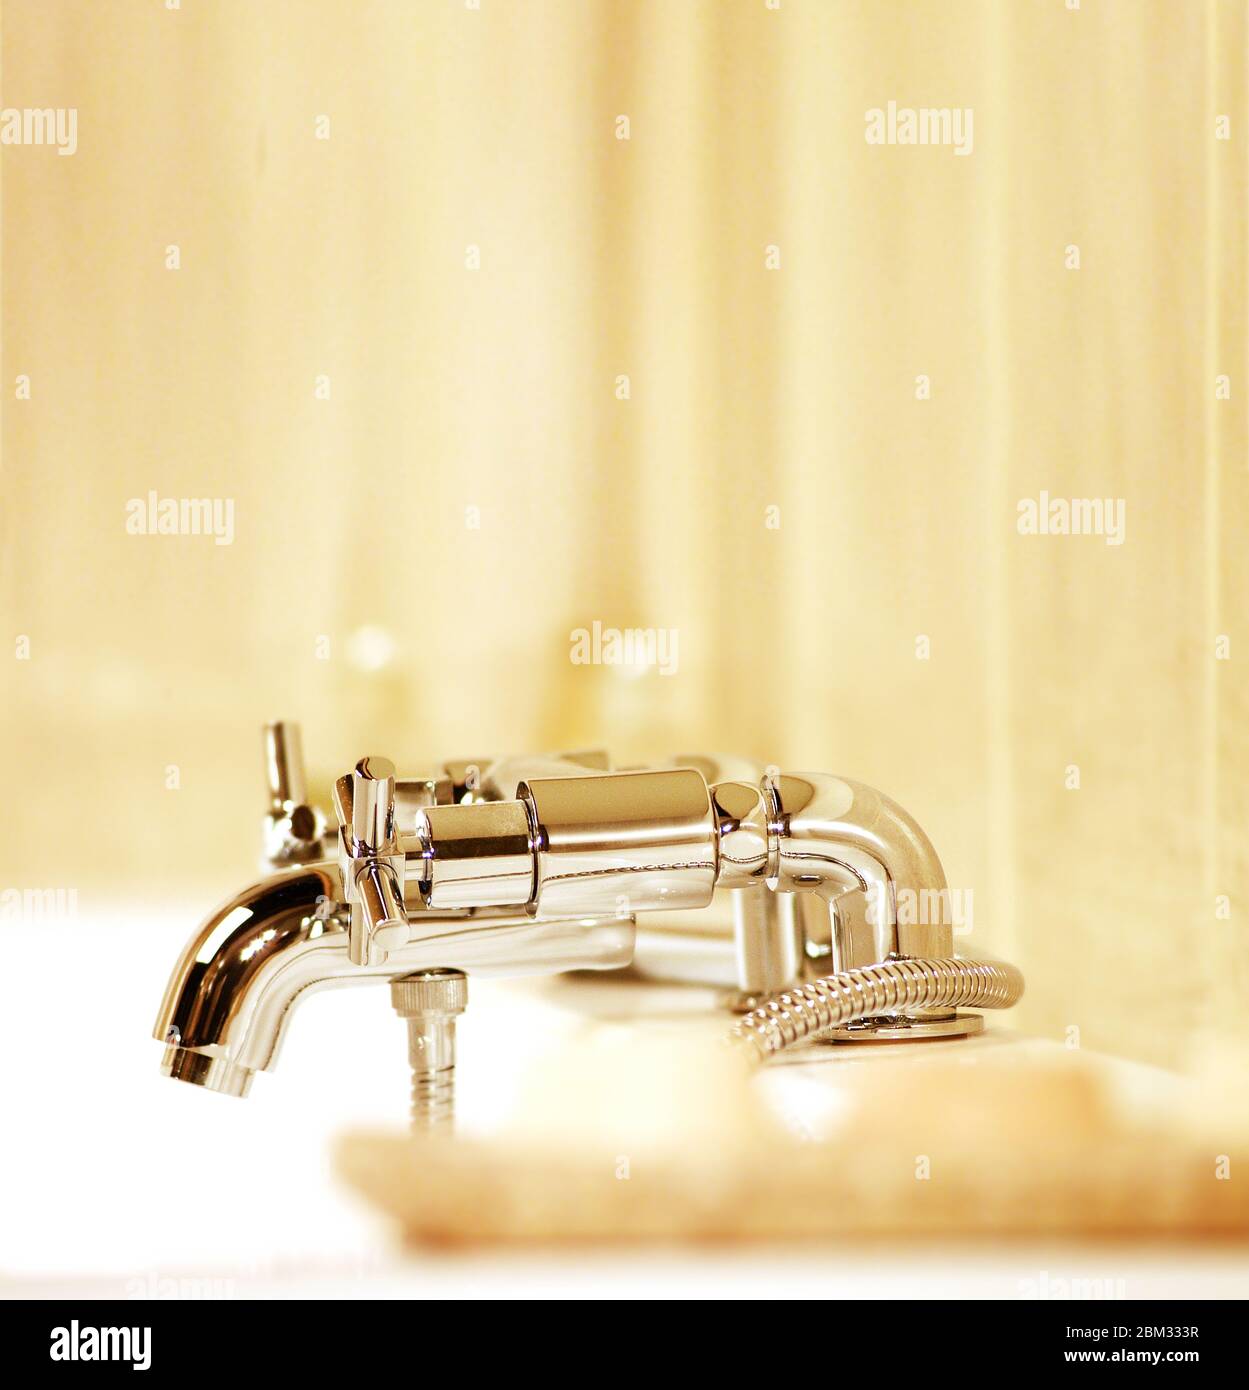 Mixer Tap Inside High Resolution Stock Photography and Images - Alamy